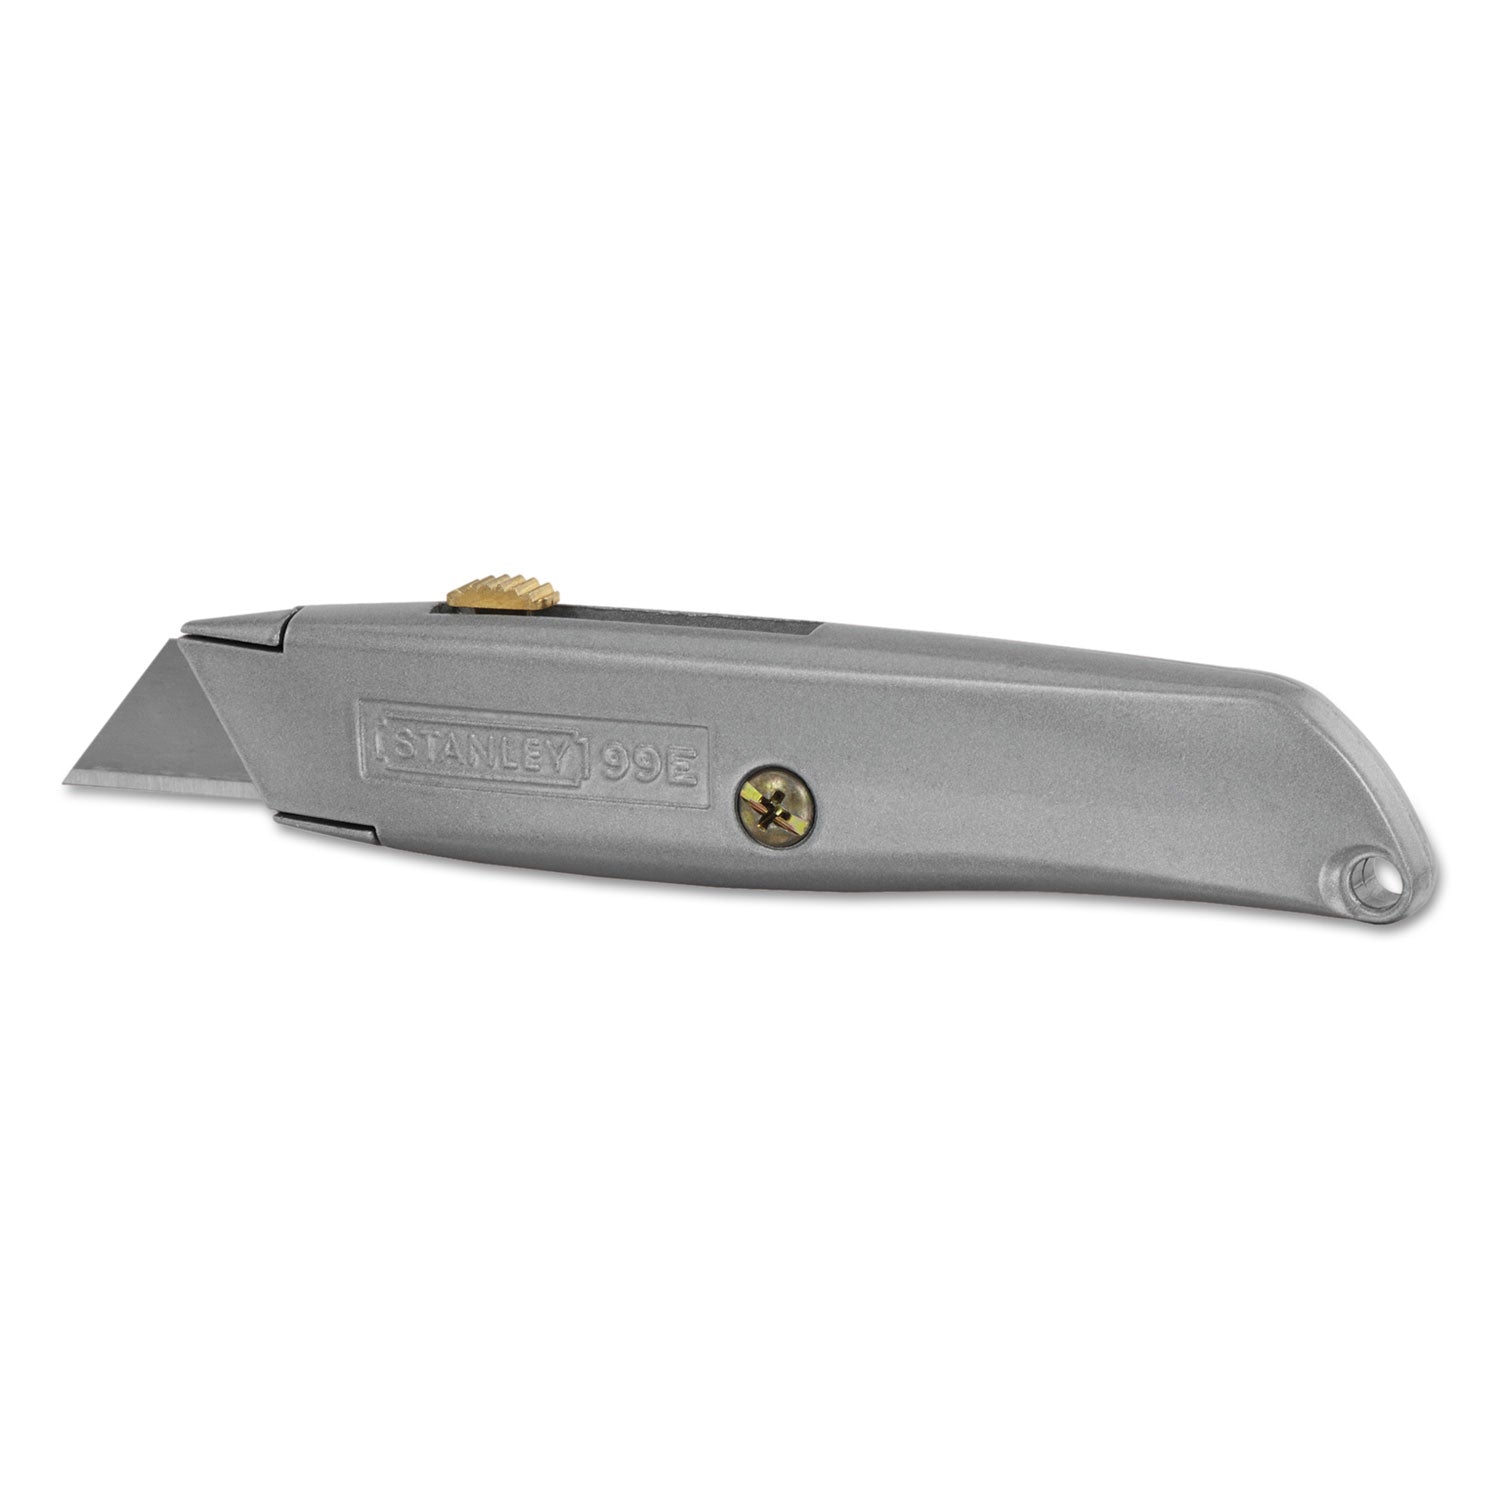 classic-99-utility-knife-with-retractable-blade-6-die-cast-handle-gray_bos10099 - 1